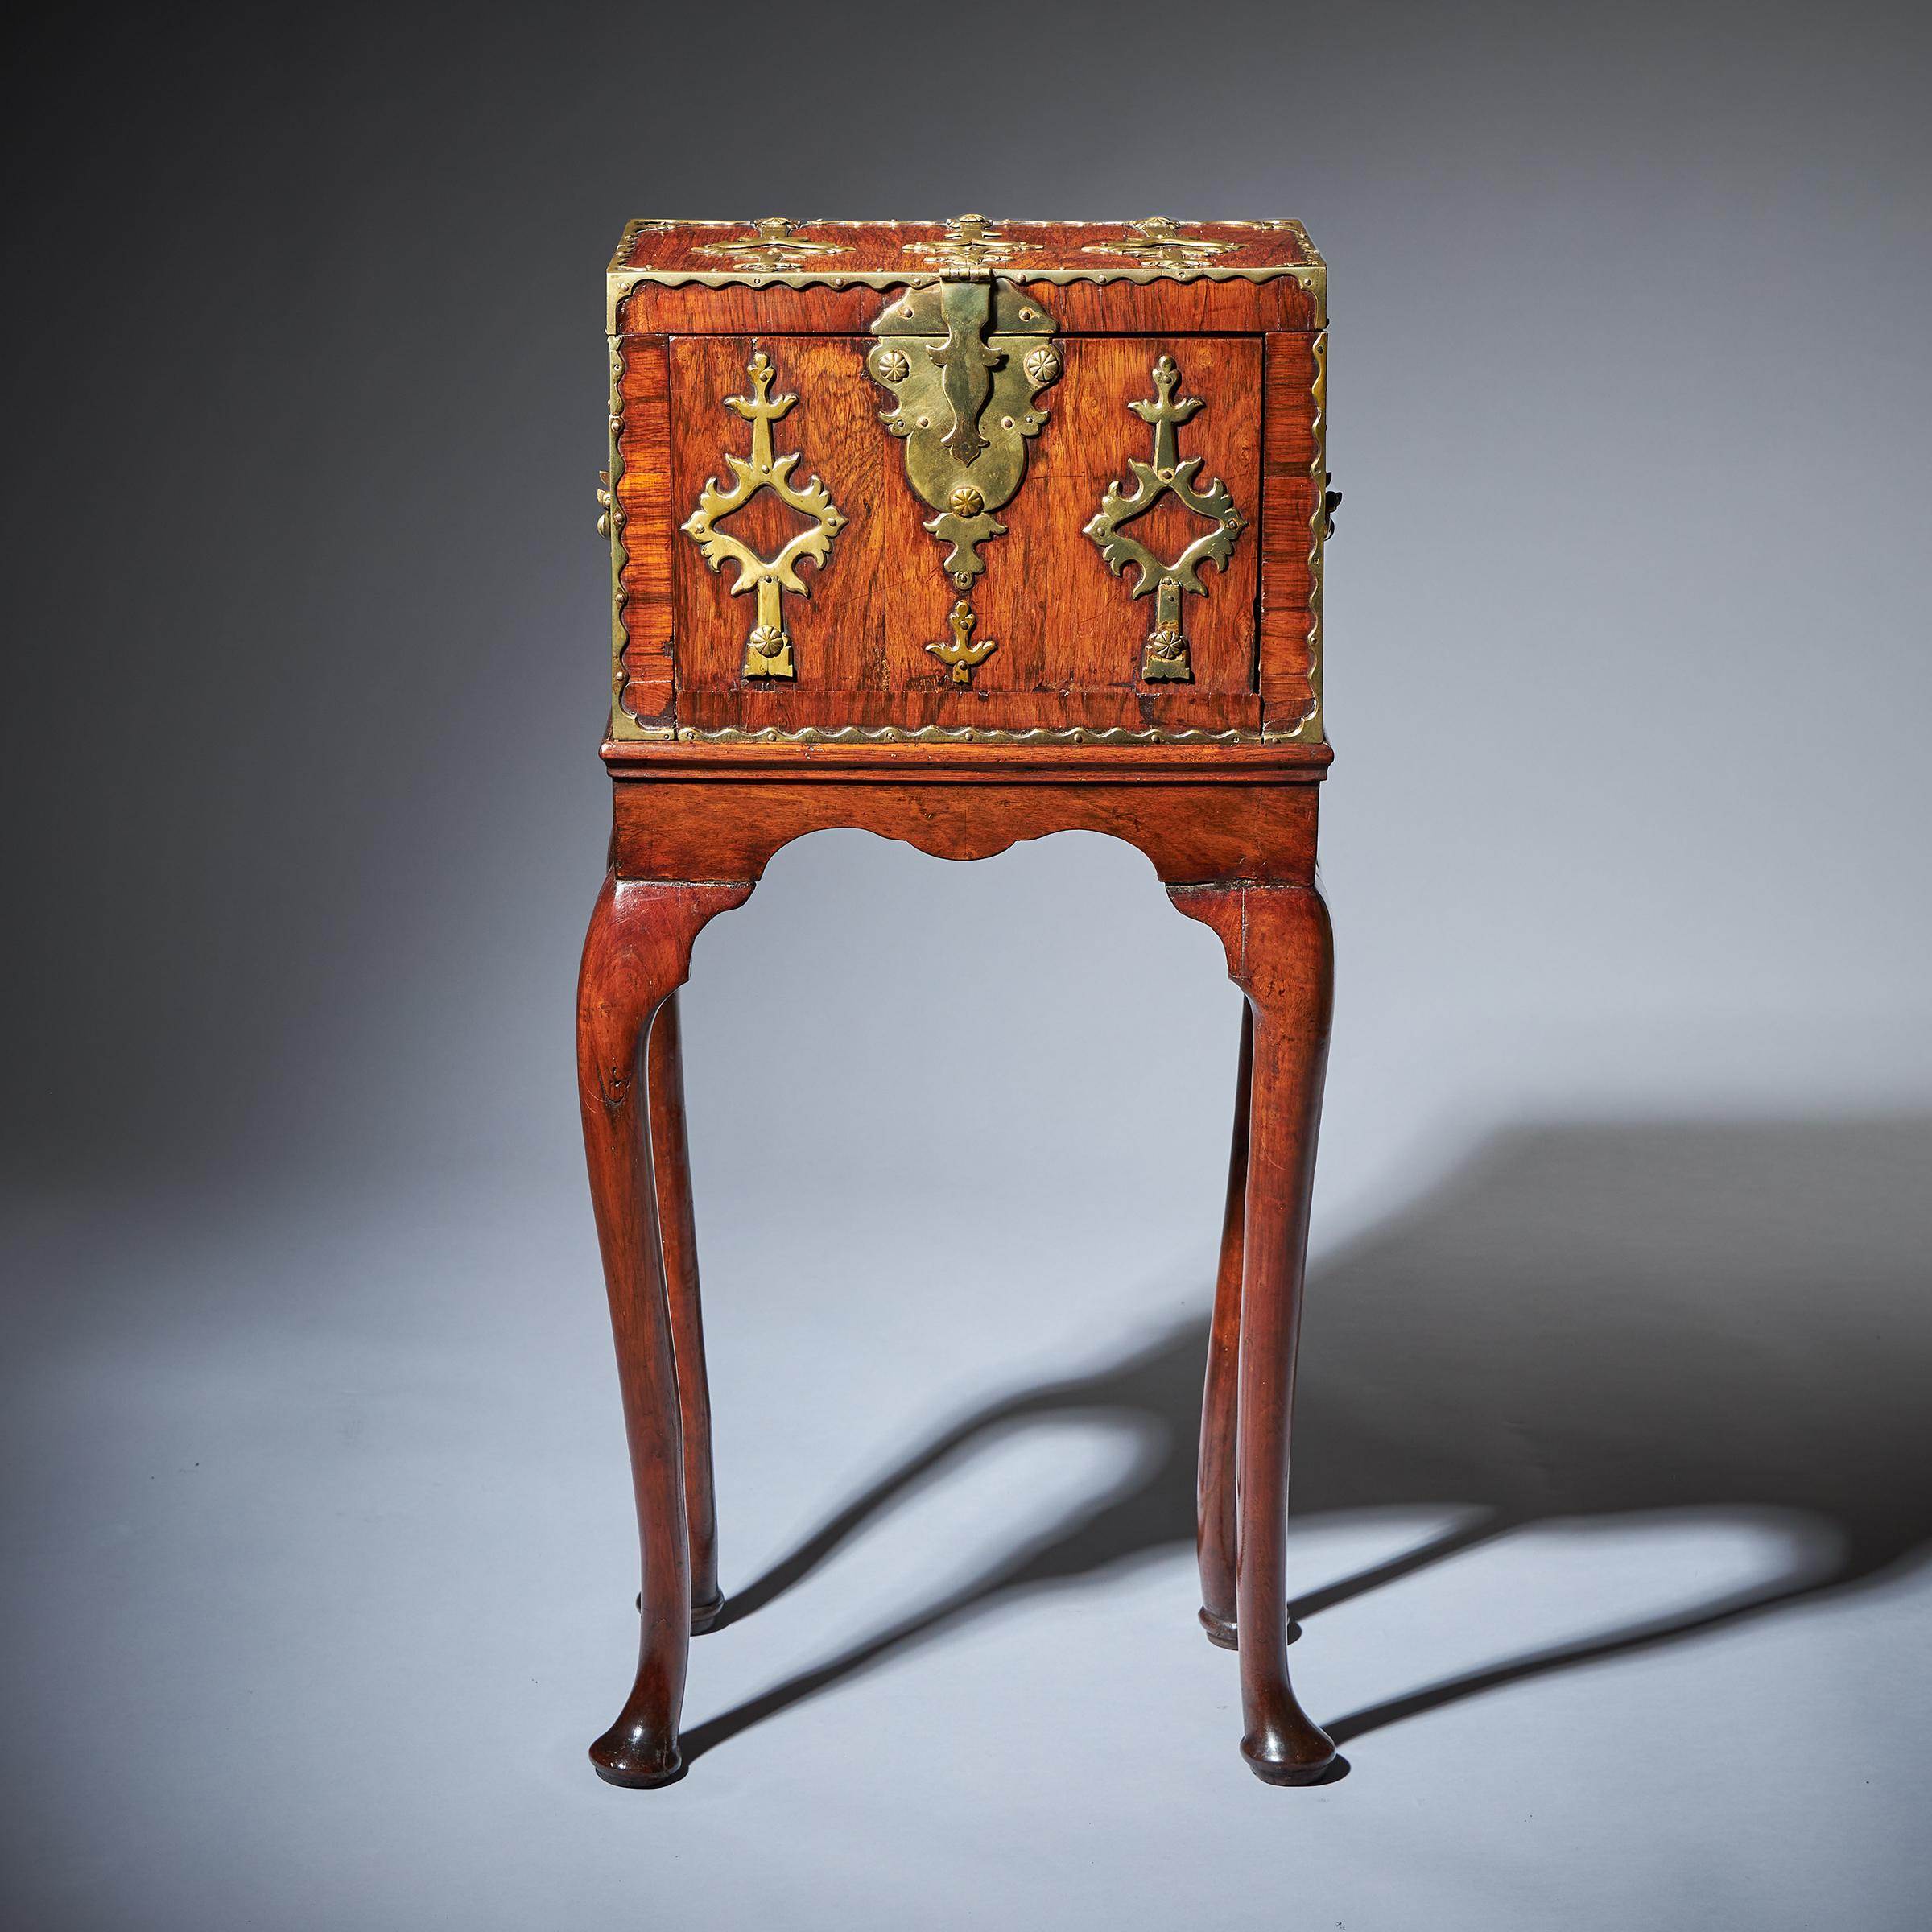 The unique 17th-century William and Mary rosewood coffre forte, circa 1690, raised on George I walnut stand, circa 1720. 

The rosewood veneered exterior is entirely decorated in gilt brass straps. Once the lid is opened you can open the gilt